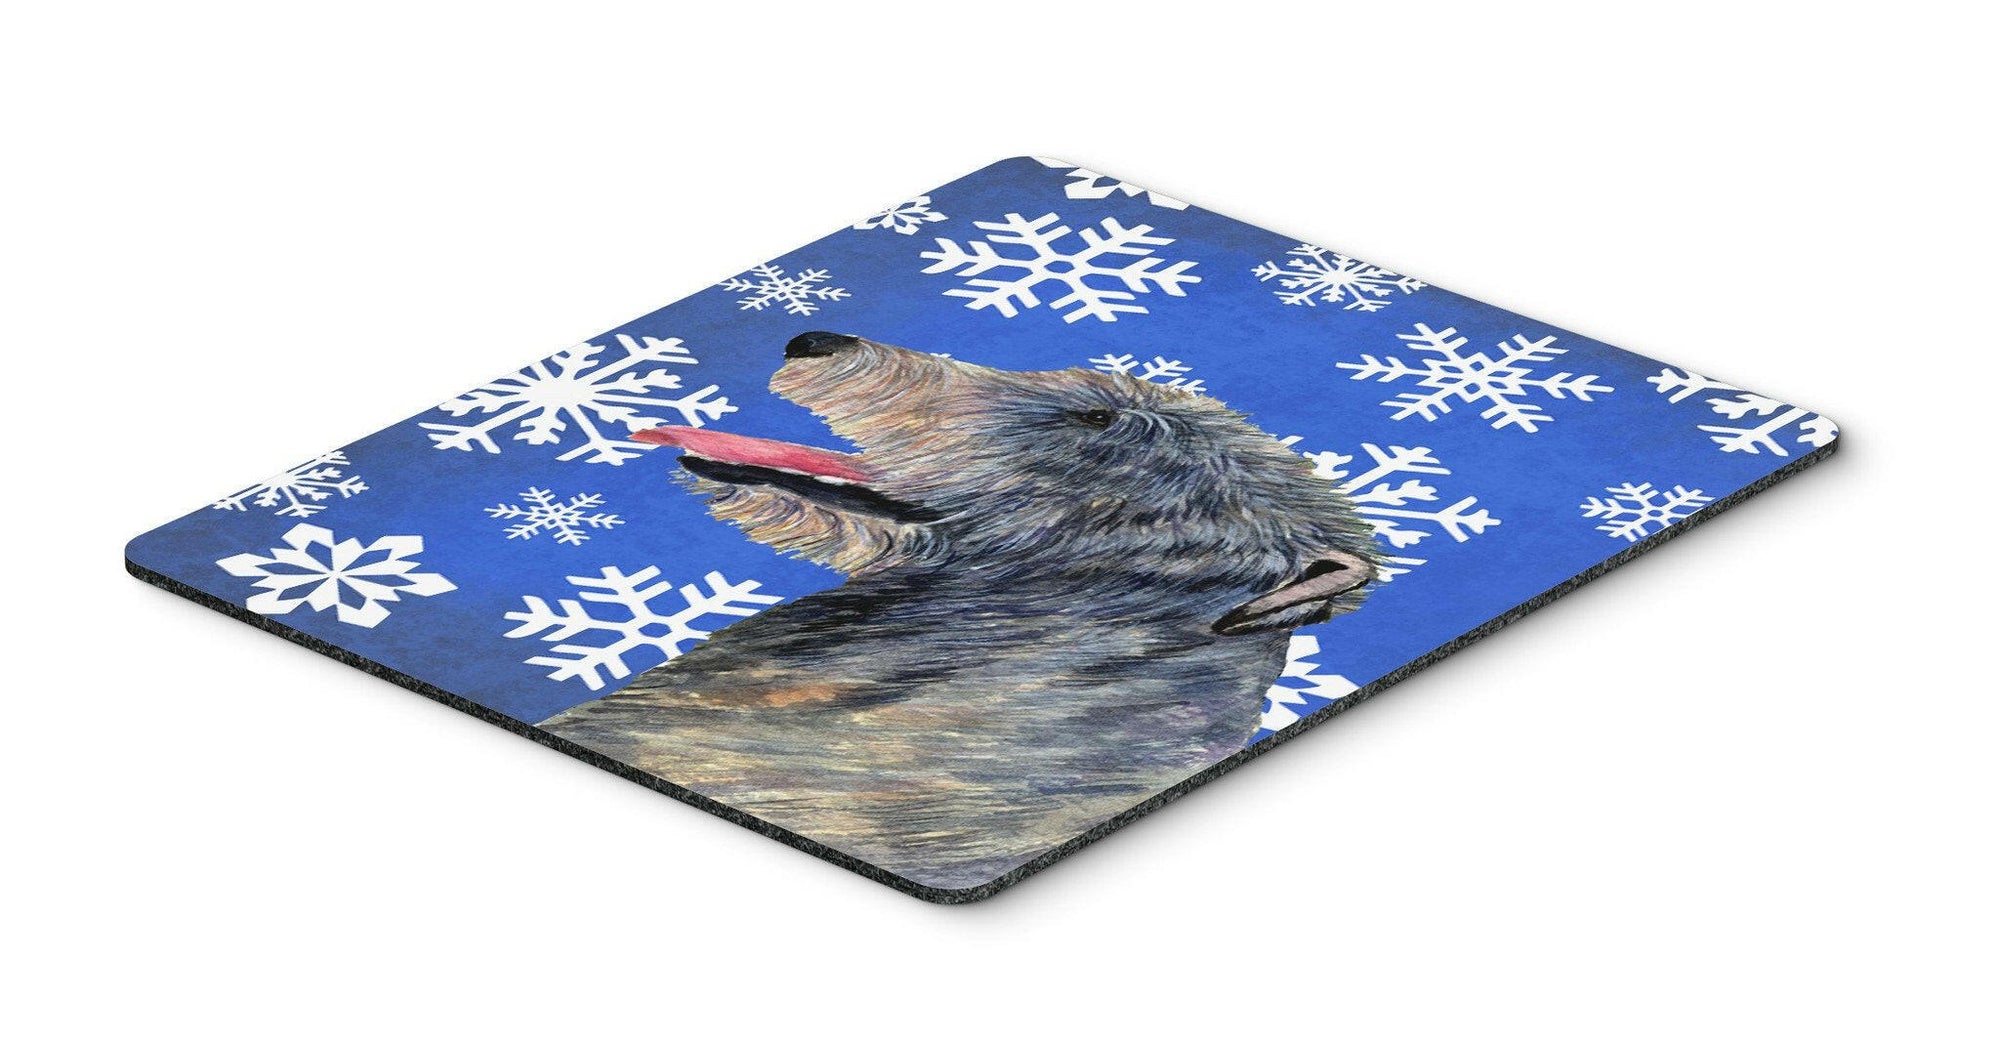 Irish Wolfhound Winter Snowflakes Holiday Mouse Pad, Hot Pad or Trivet by Caroline's Treasures